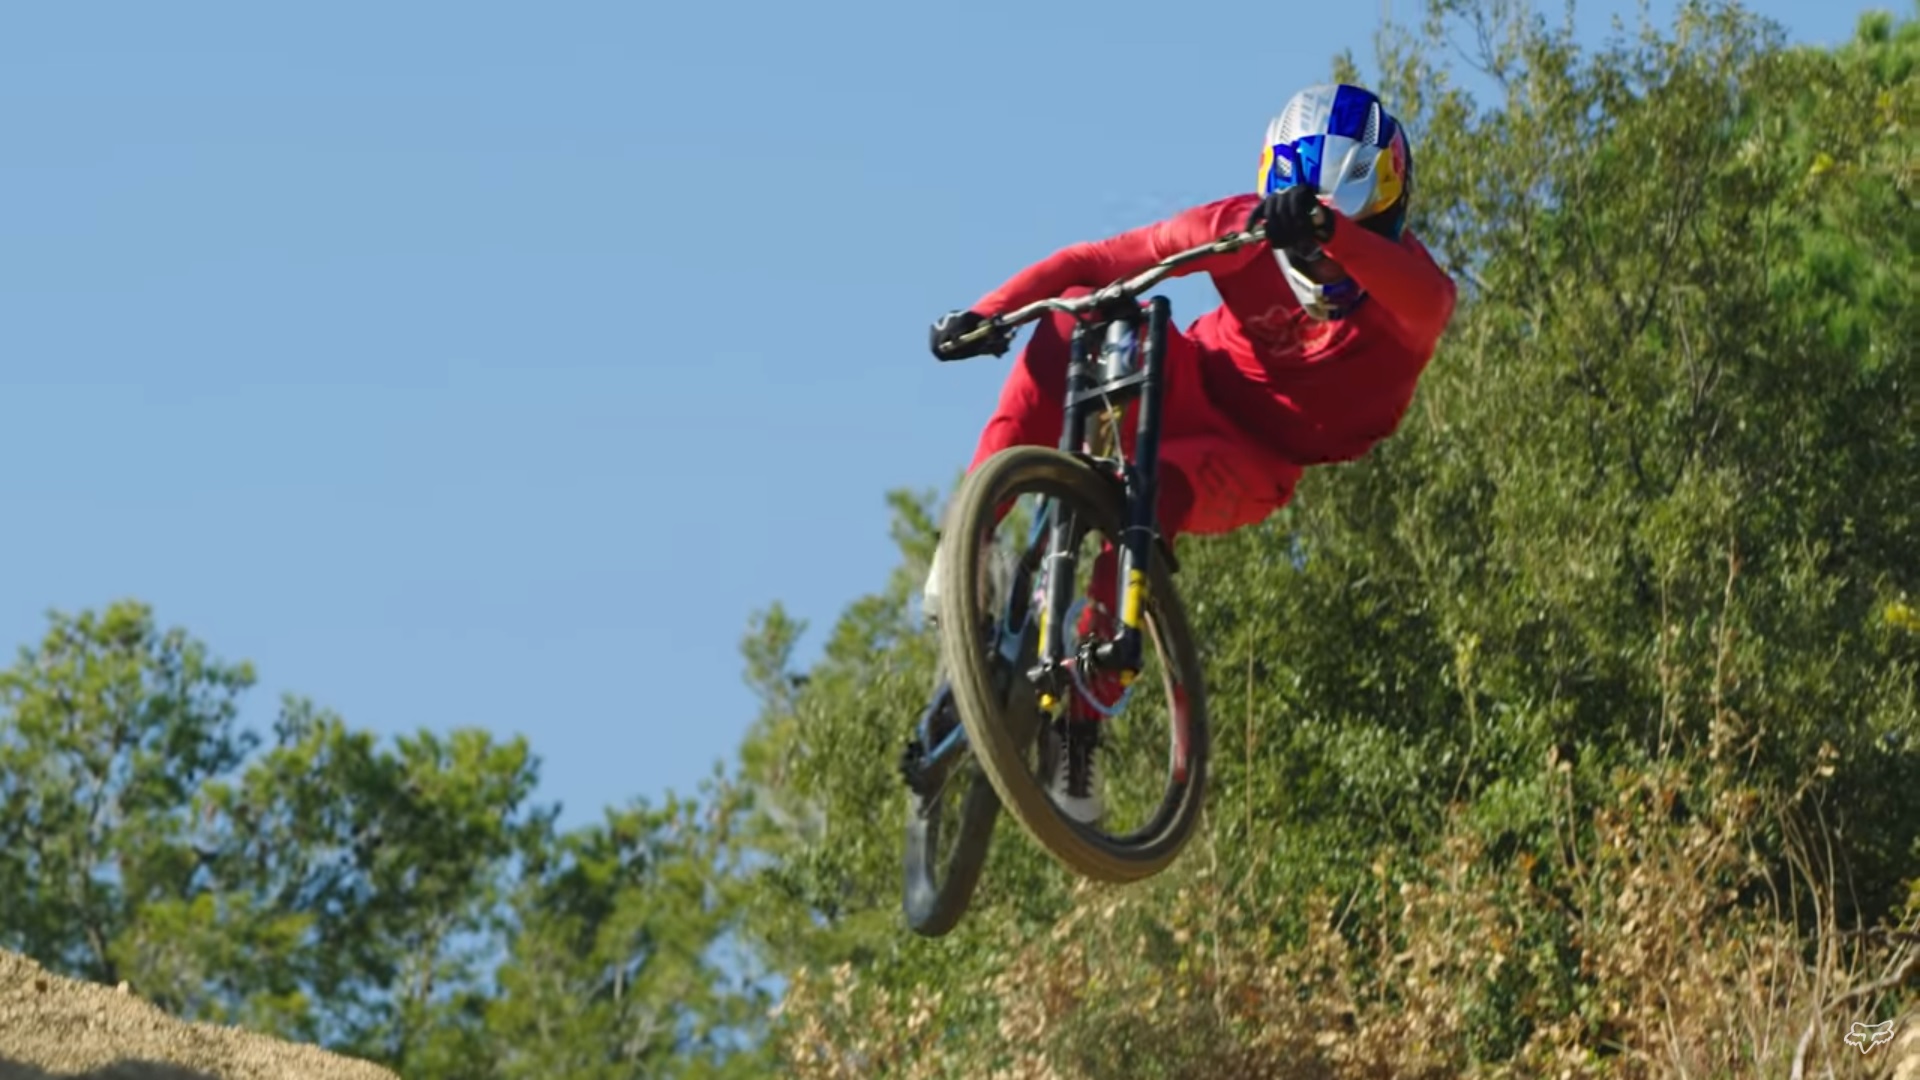 Fox Mtb Made For Your Ride Episode Loic Bruni Revolution R